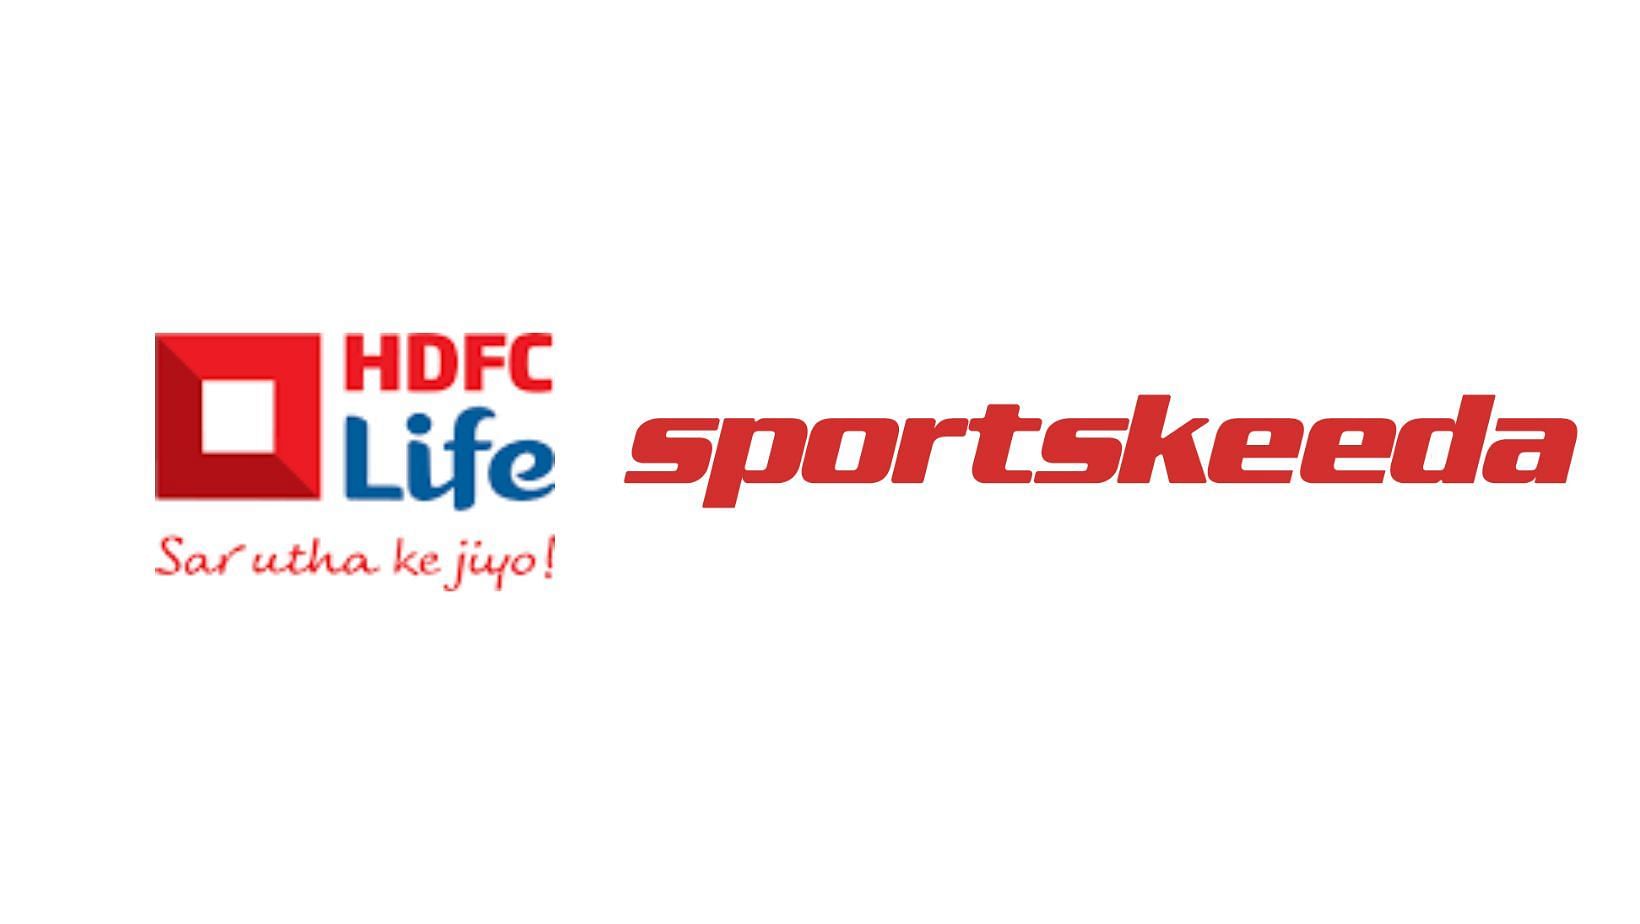 HDFC Life Partners with Sportskeeda for IPL 2020